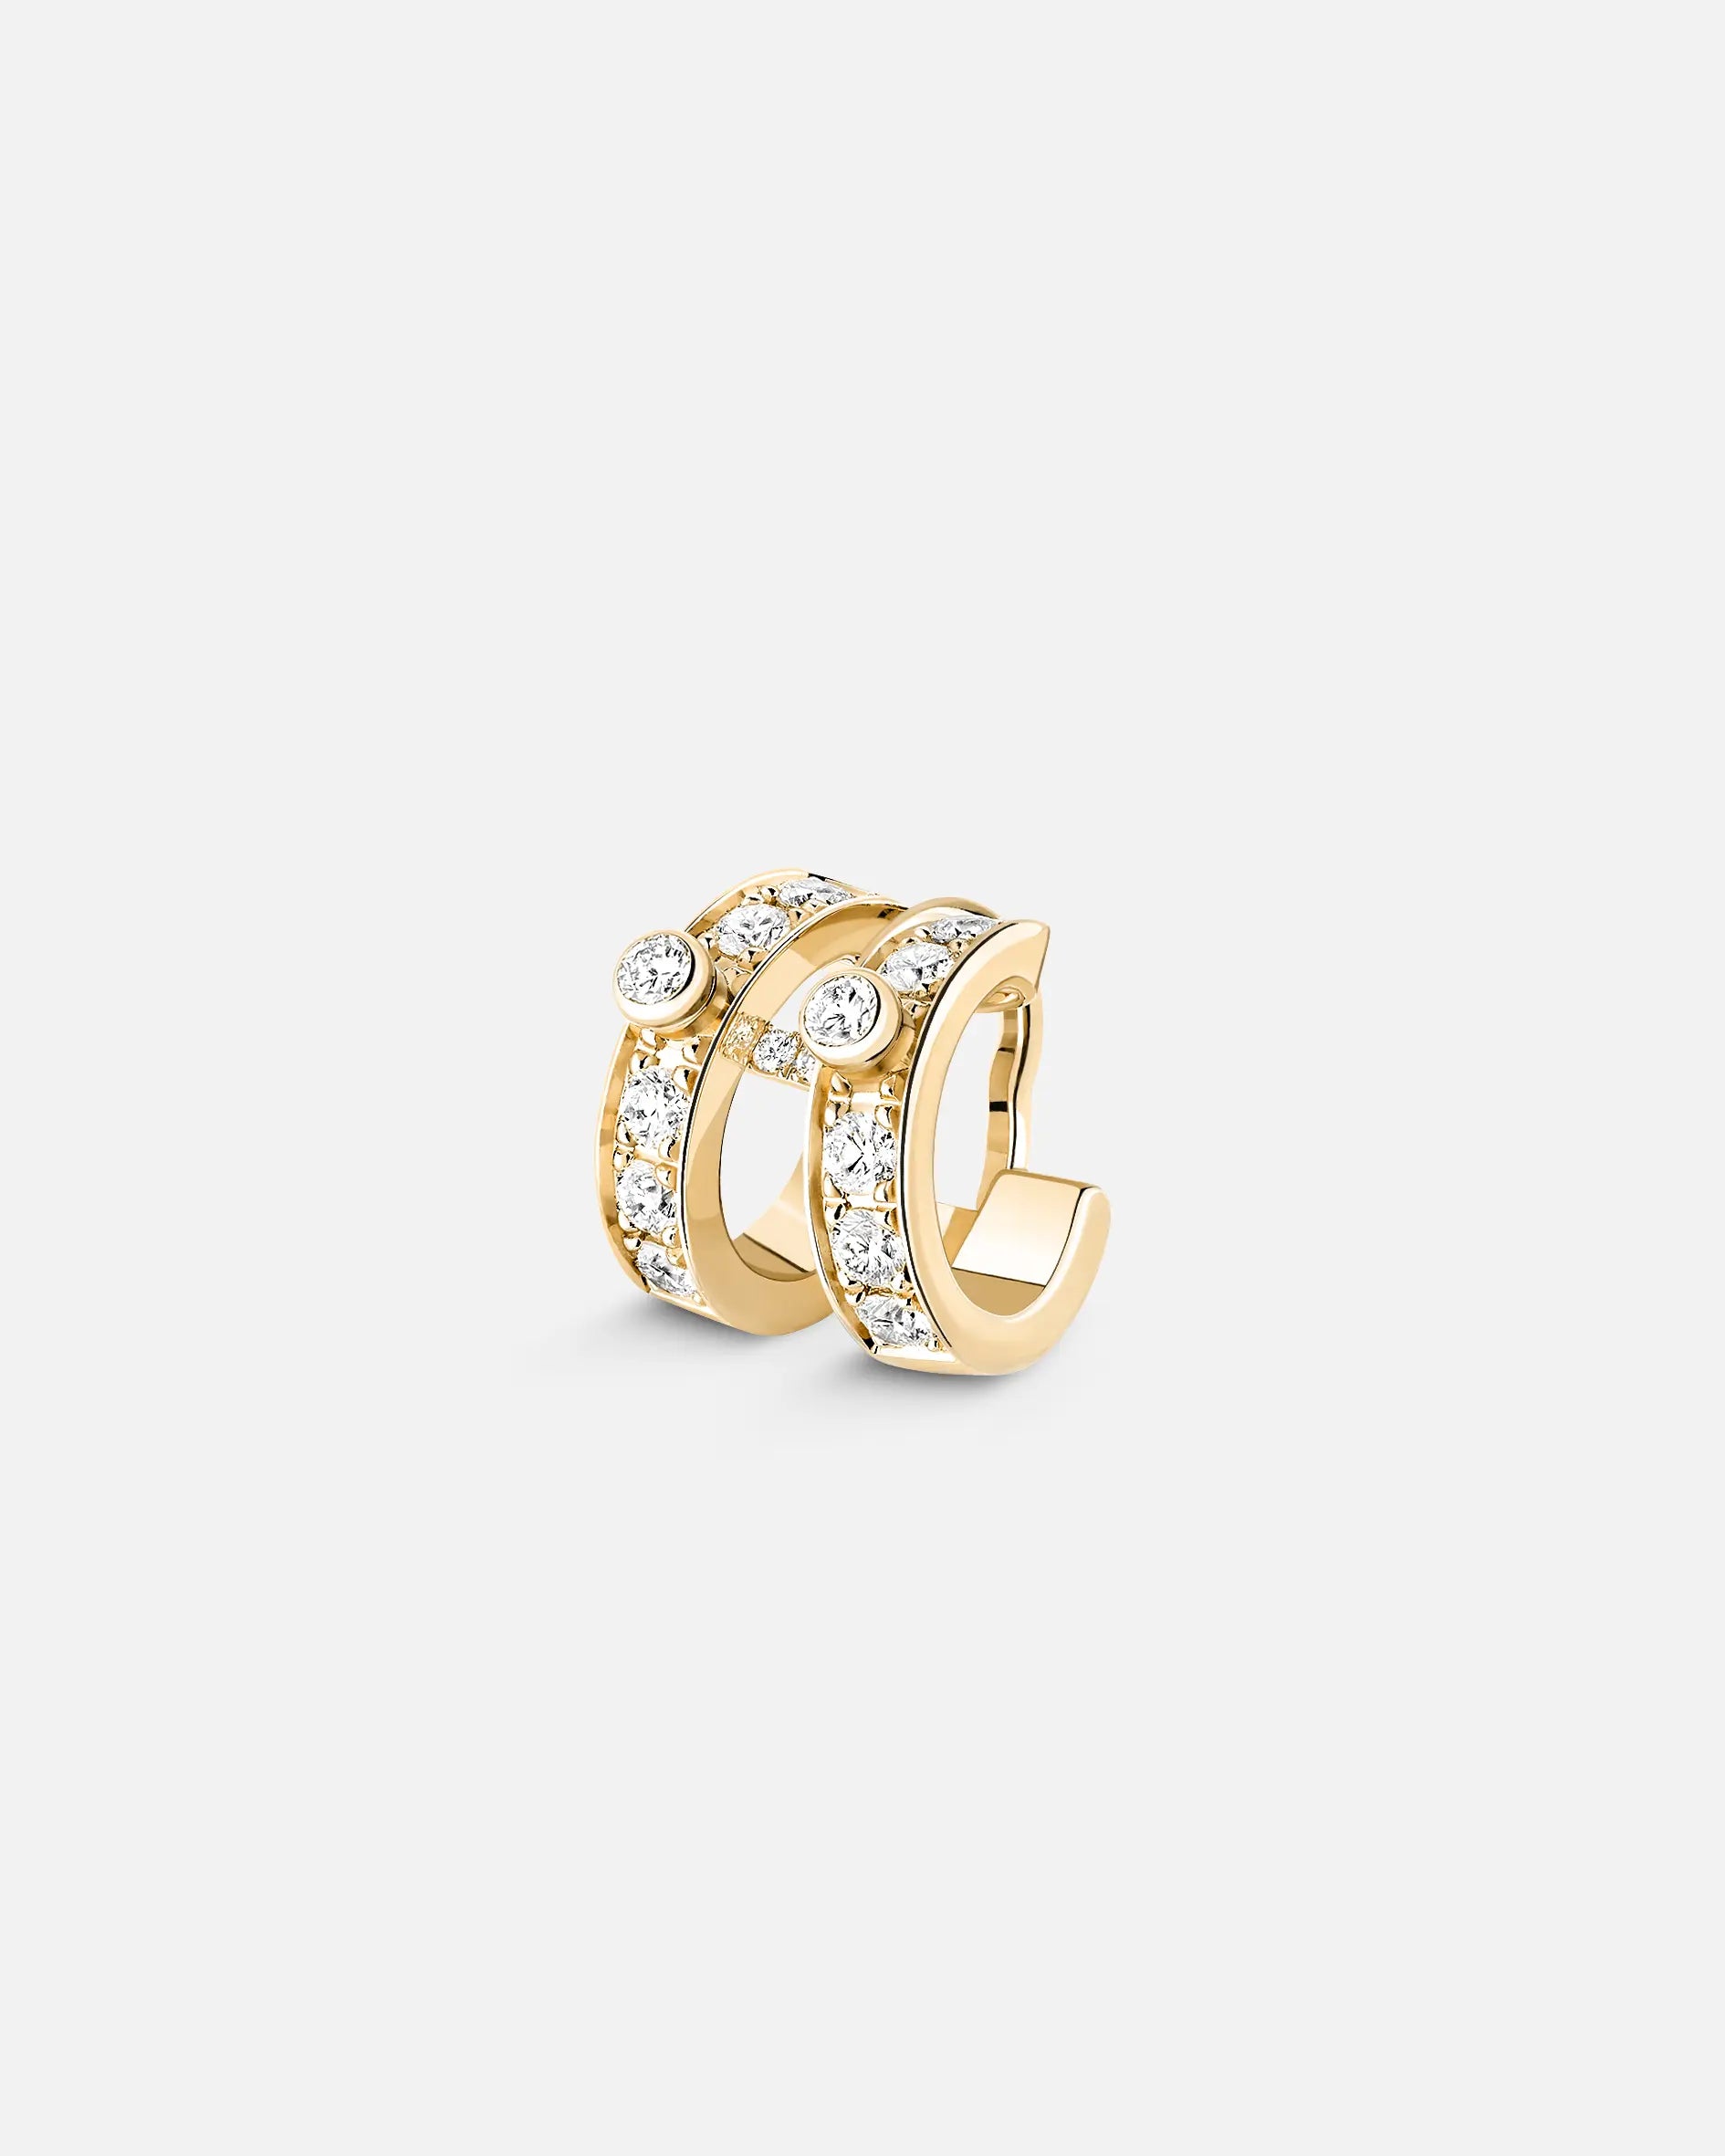 Eternity Tuxedo Ear Clip in Yellow Gold - 1 - Nouvel Heritage